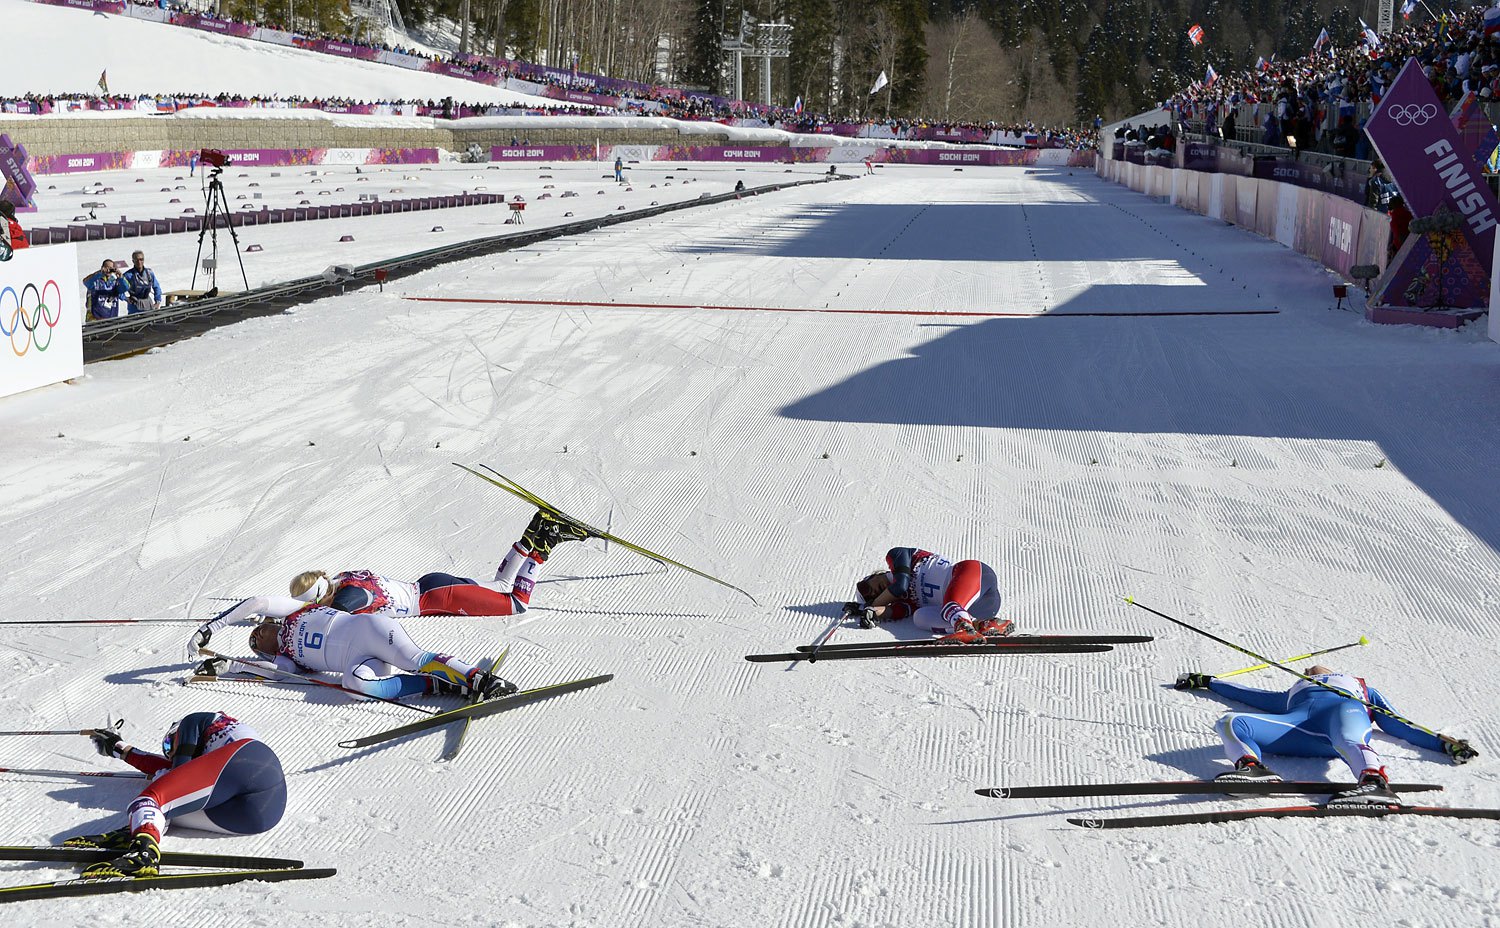 From left to right, Norway's Marit Bjoergen, Sweden's Charlotte Kalla, Norway's Therese Johaug, Norway's Heidi Weng and Finland's Aino-Kaisa Saarinen react after the Women's Cross-Country Skiing 7,5km + 7,5km Skiathlon at the Laura Cross-Country Ski and Biathlon Center on Feb. 8, 2014.AFP PHOTO / ODD ANDERSEN        (Photo credit should read ODD ANDERSEN/AFP/Getty Images)